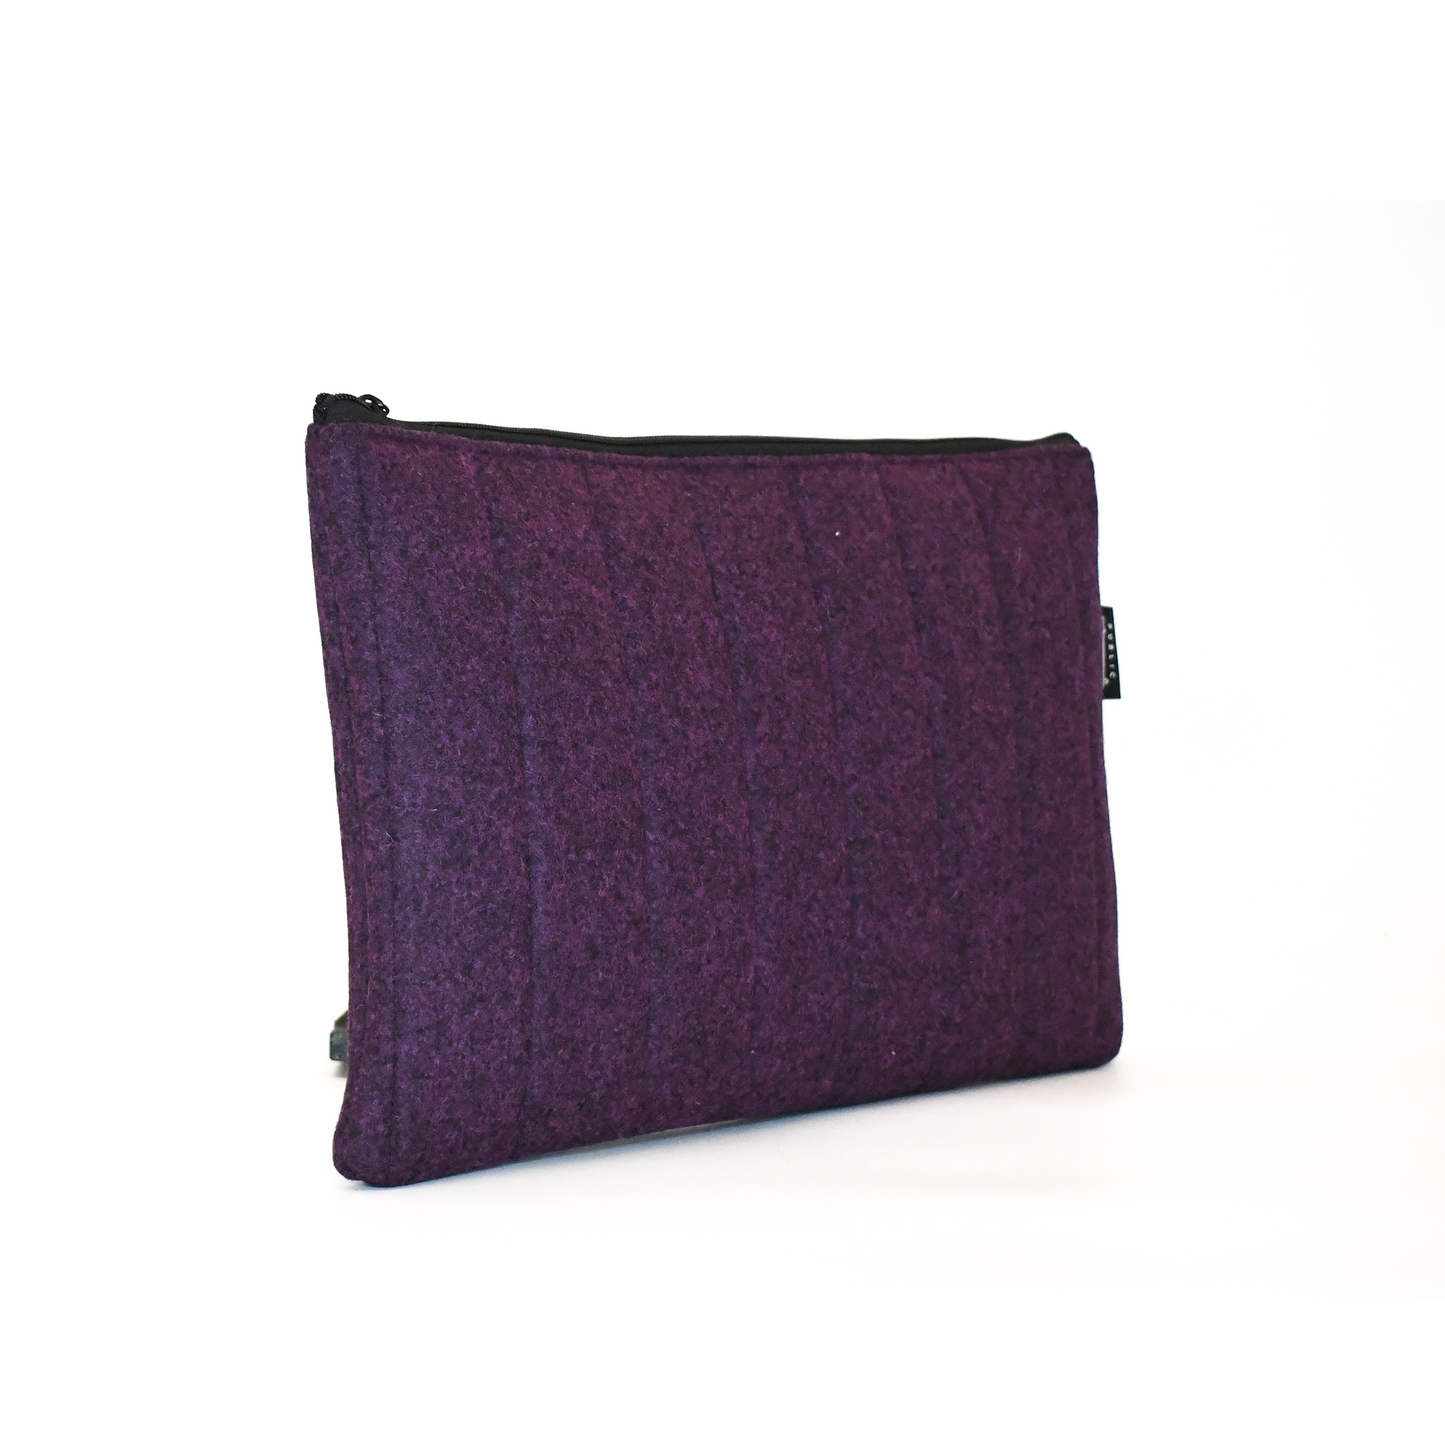 Upcycled Wool Laptop Case - Small